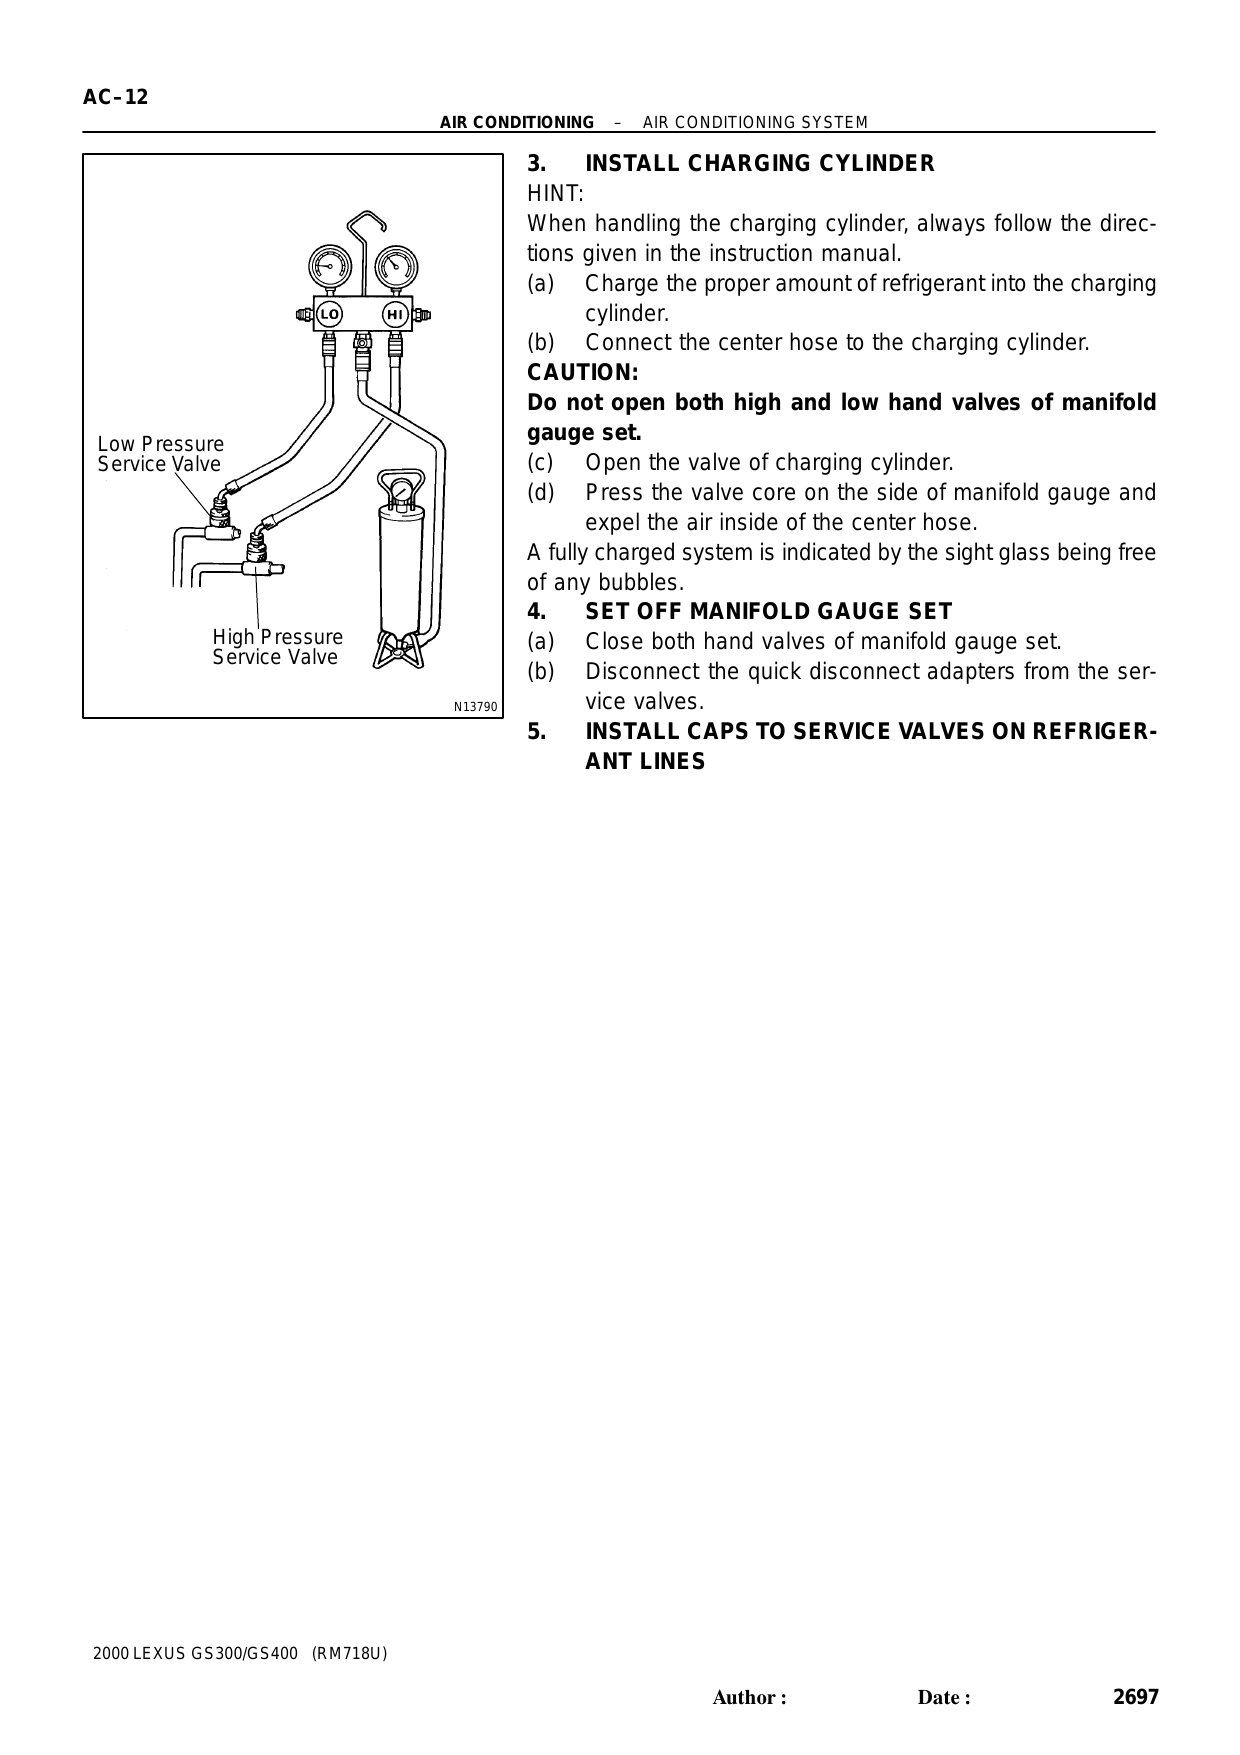 1997-2001 Lexus GS 300, GS 400 repair and service manual Preview image 5